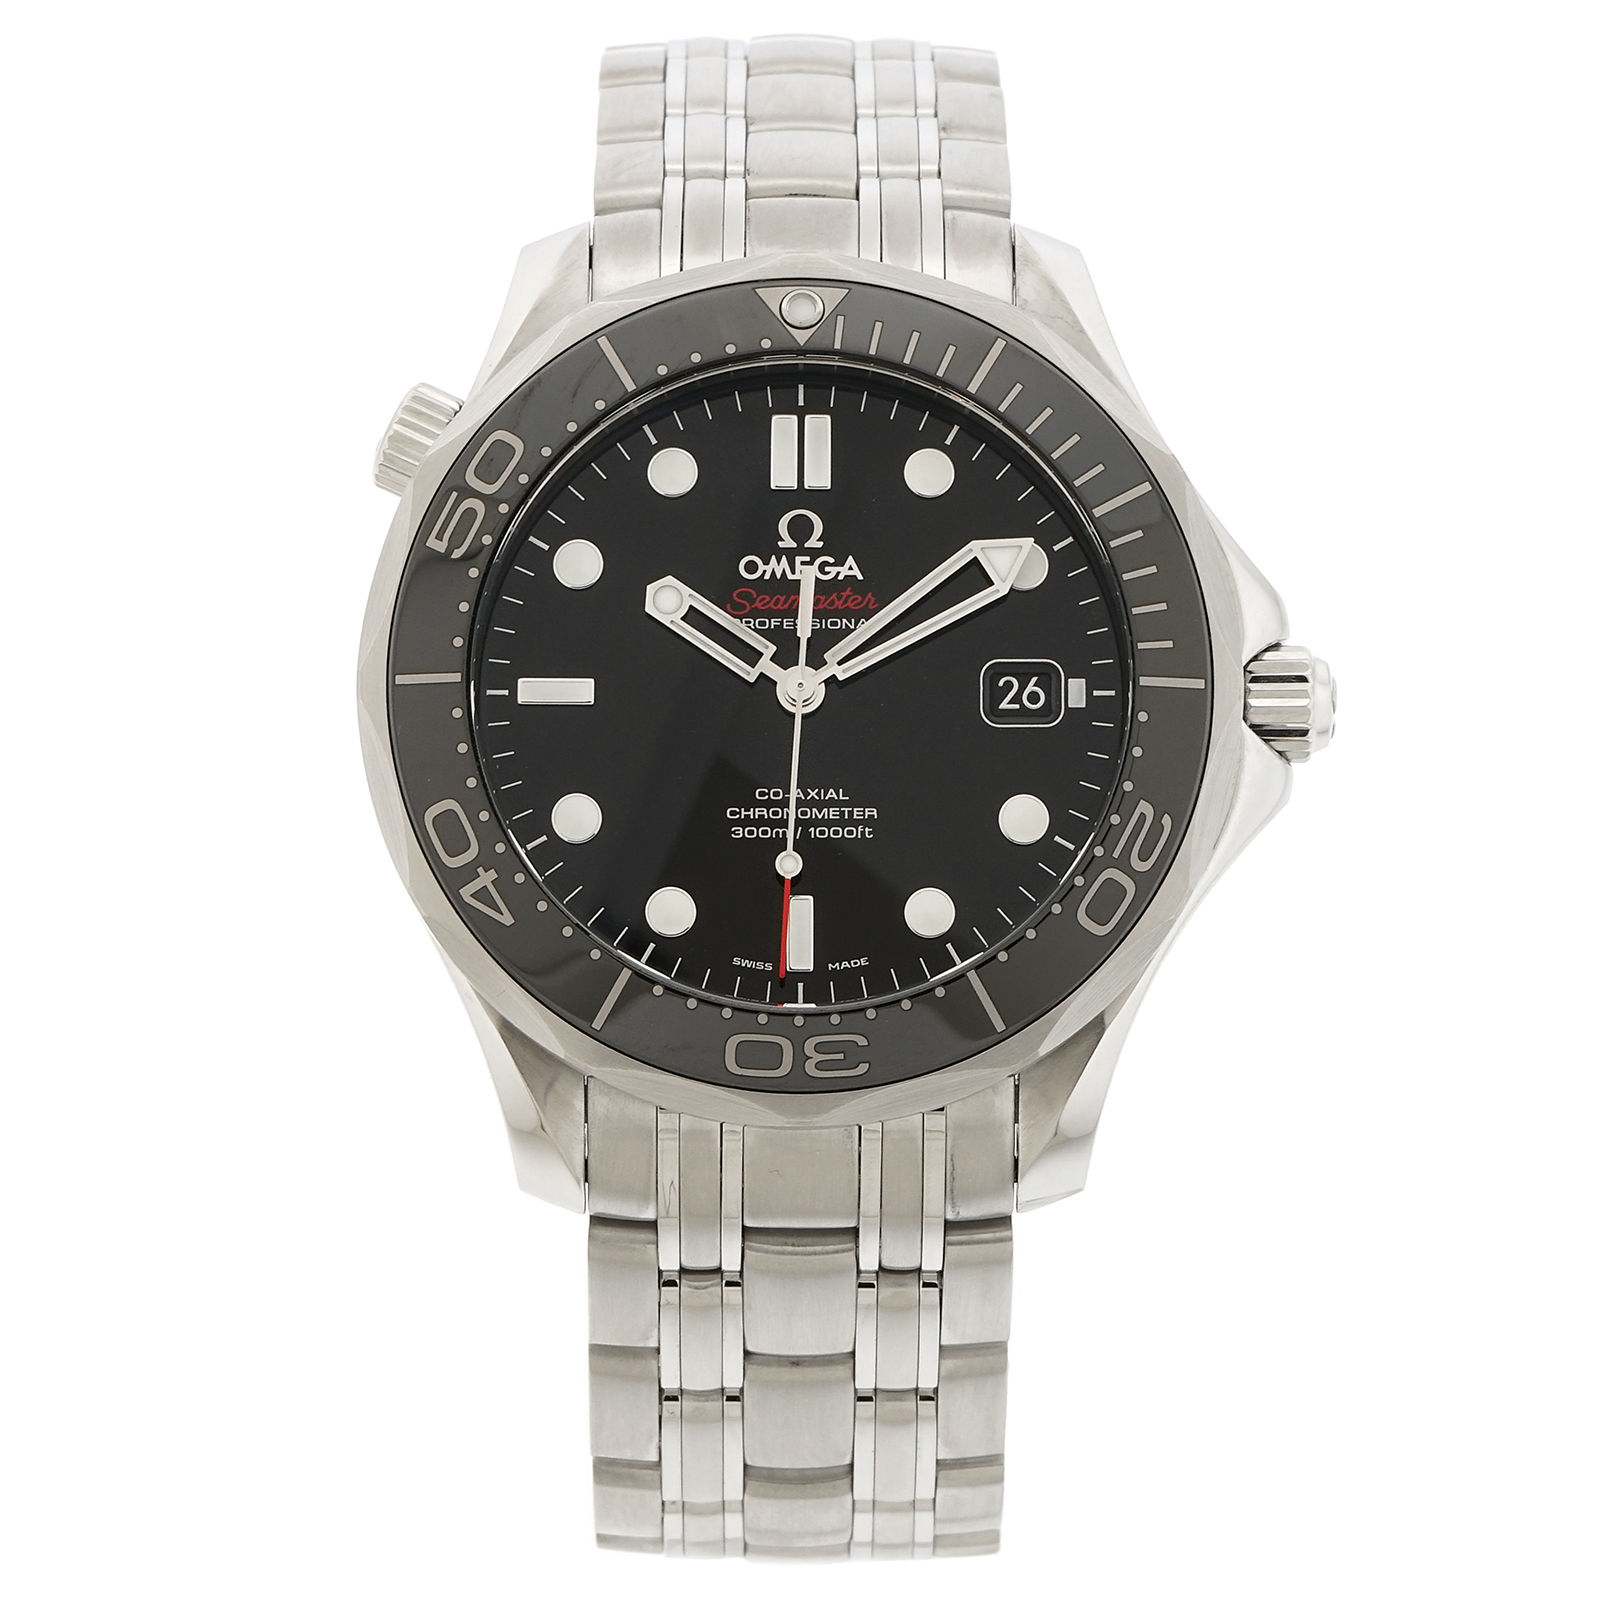 Omega Seamaster 300m Co-axial | New York Jewelers Chicago